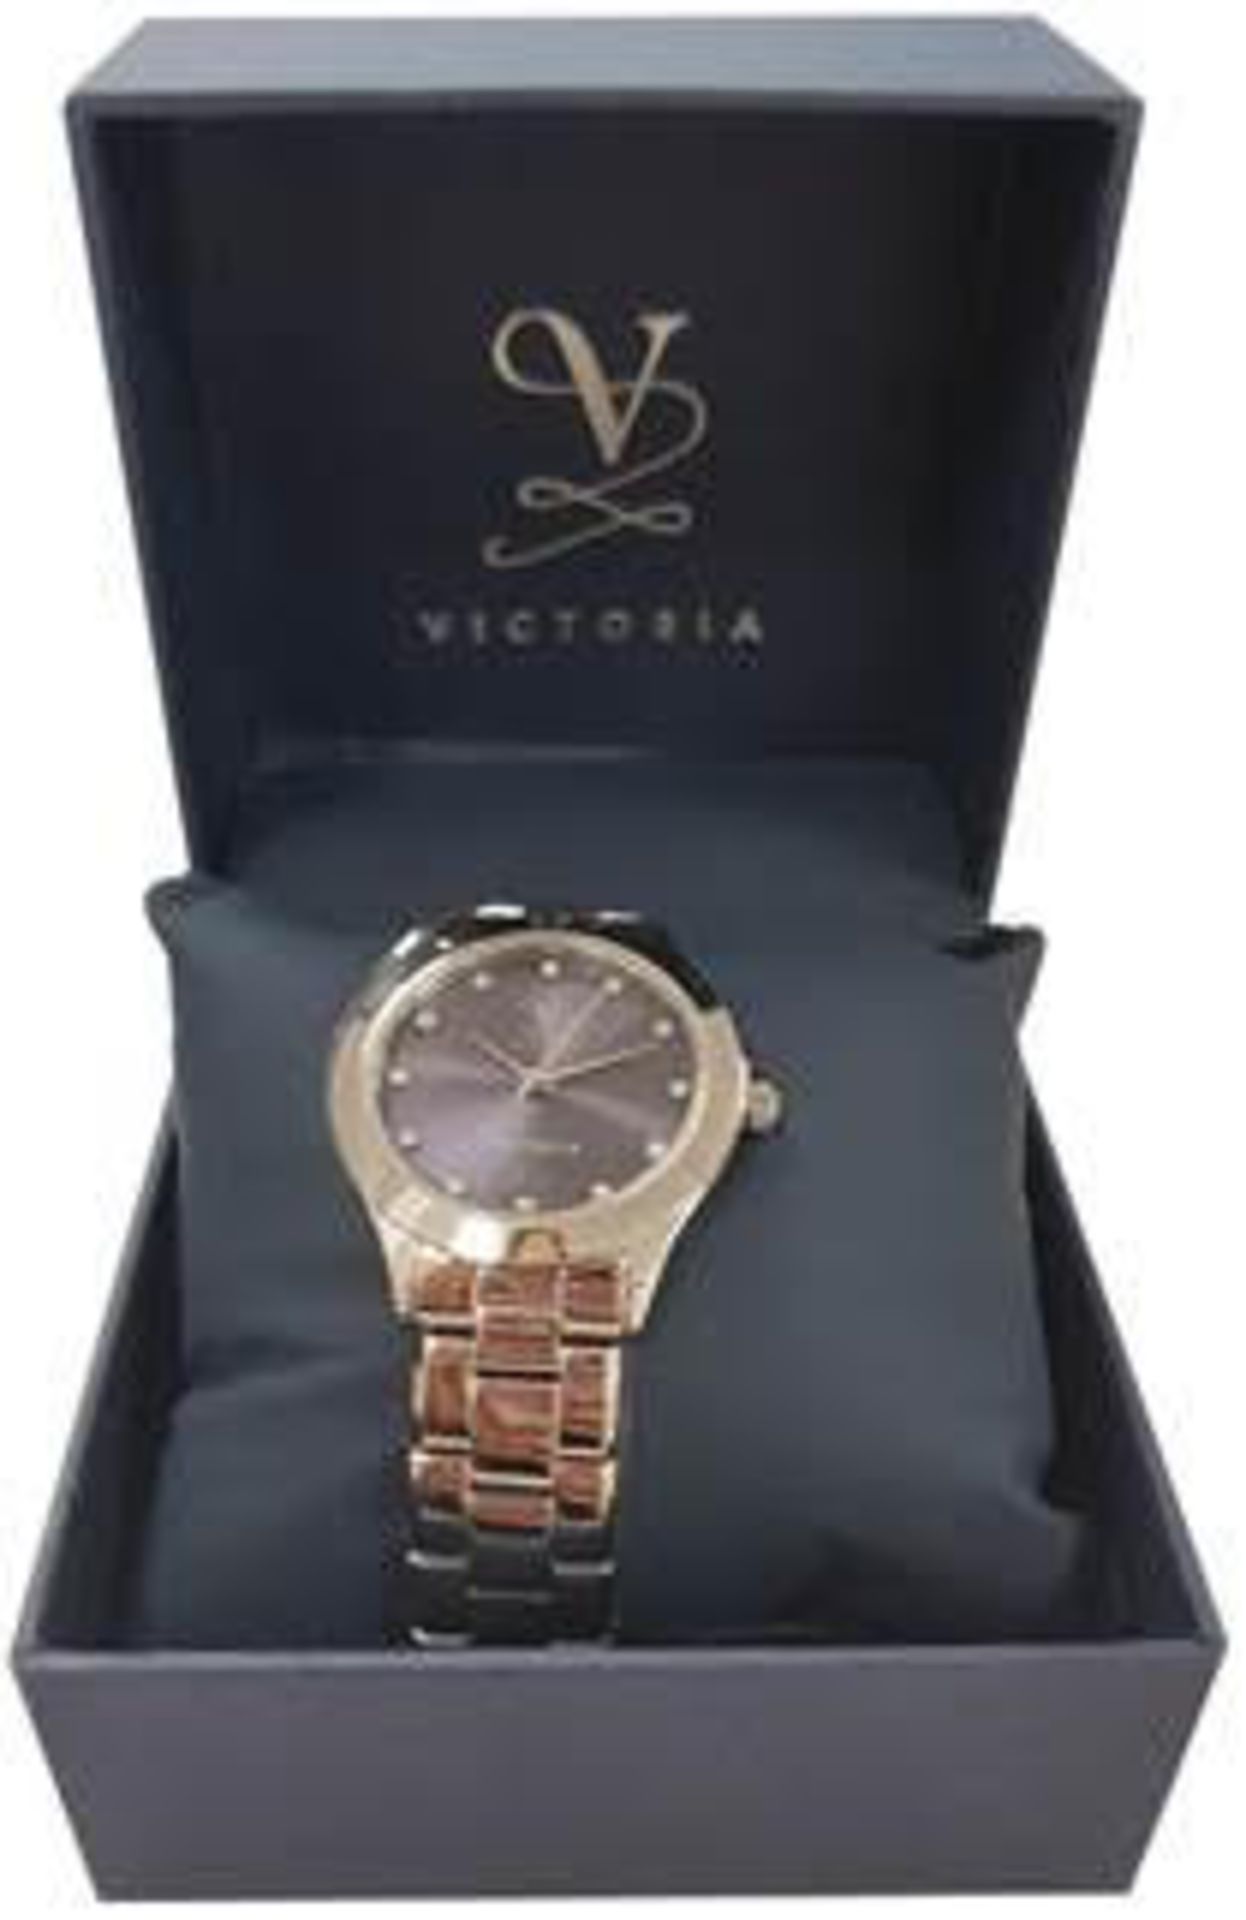 + VAT Brand New Ladies Victoria Stainless Steel Watch With Bracelet Strap - Navy Face - Silver - Image 2 of 3